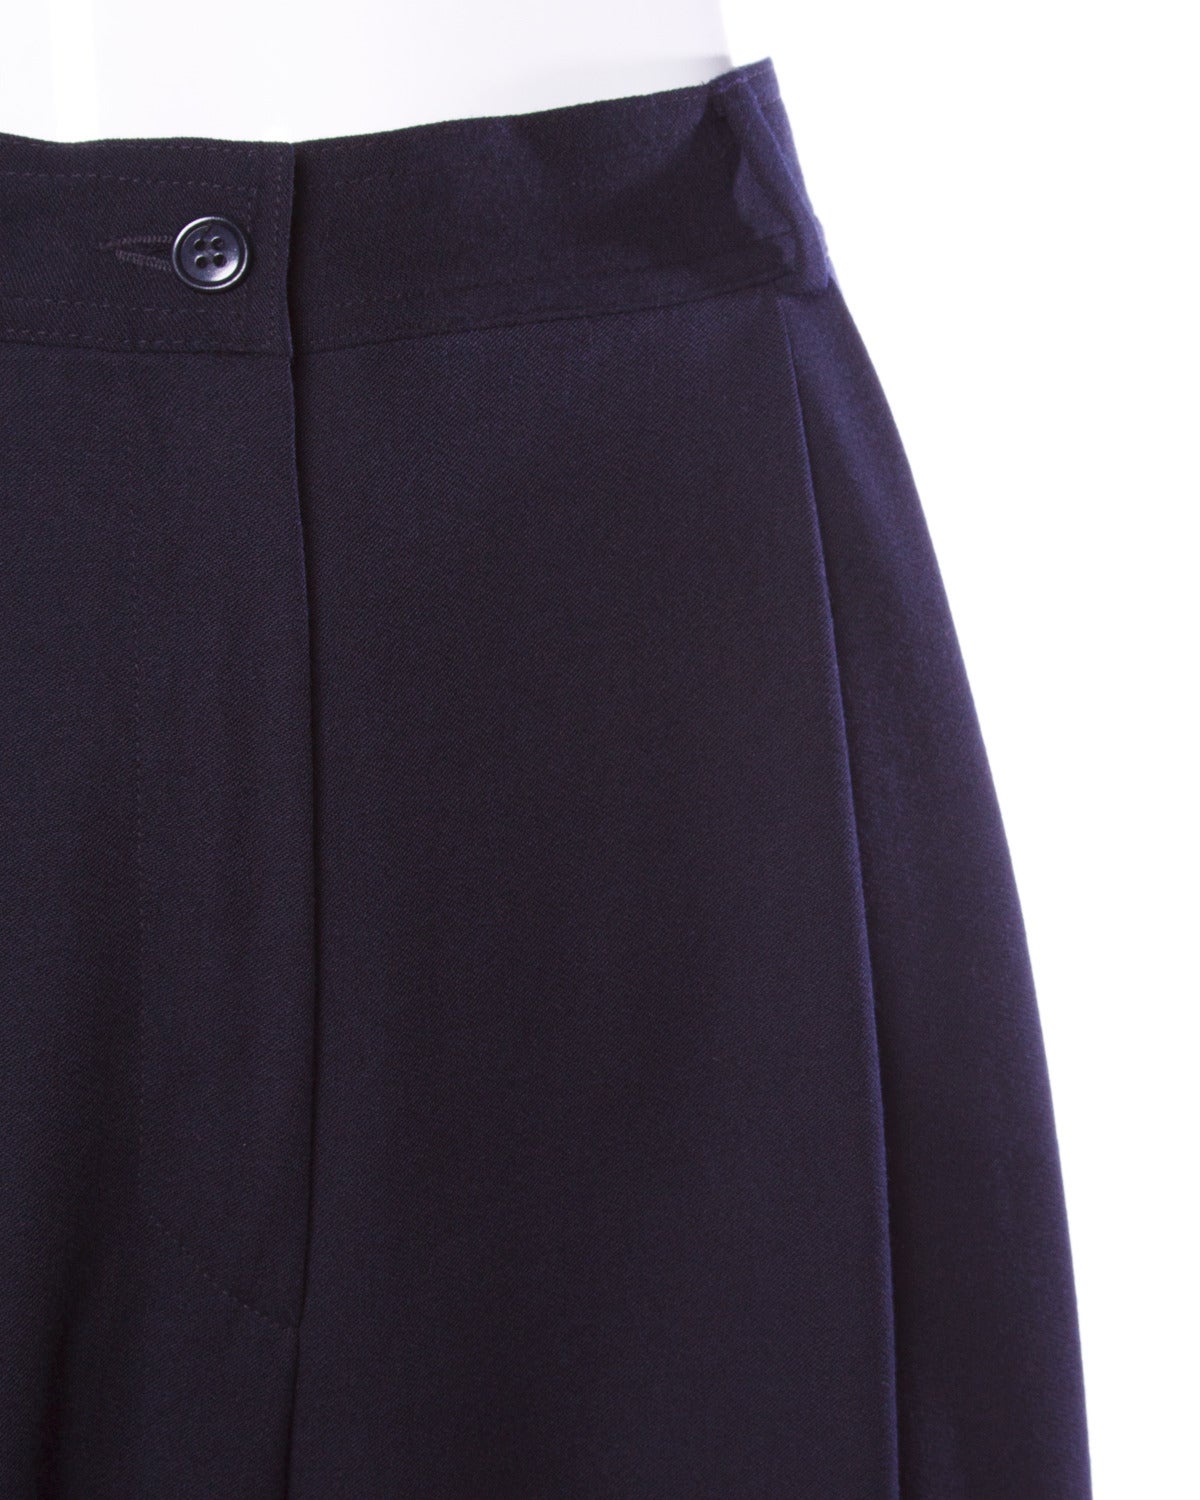 Vintage Valentino pleated trousers with side pockets and a high waist. Classic and elegant.

Details:

Unlined
Side Pockets
Front Button and Zip Closure
Marked Size: 12/ 46
Color: Navy Blue
Fabric: Wool
Label: Valentino/ Miss